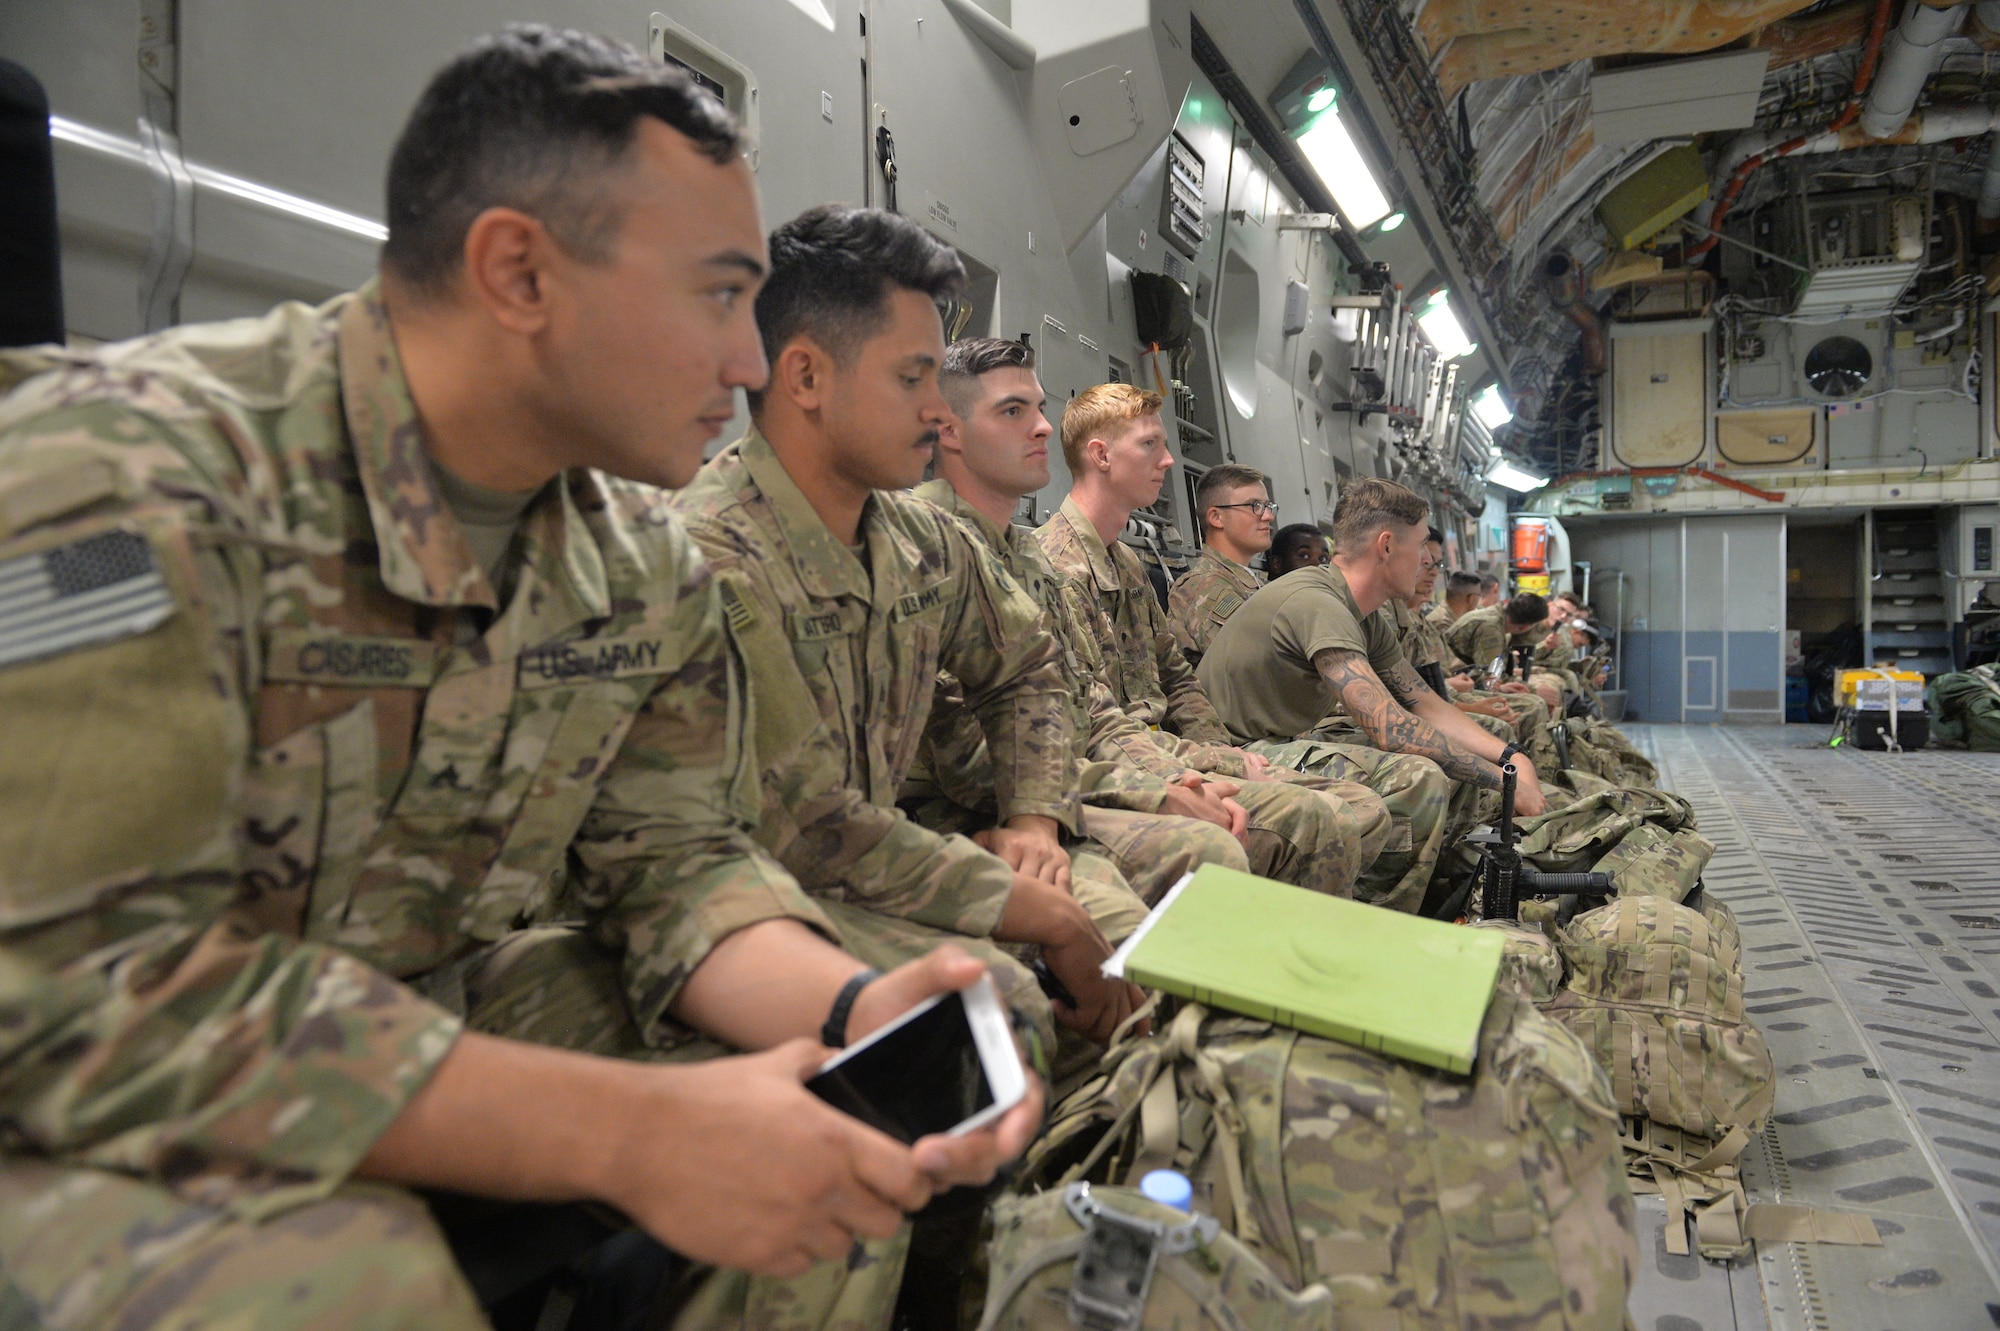 U.S. Army Soldiers with the 4th Infantry Division, board a C-17 Globemaster III at Prince Sultan Air Base (PSAB), Kingdom of Saudi Arabia (KSA), October 23, 2109.